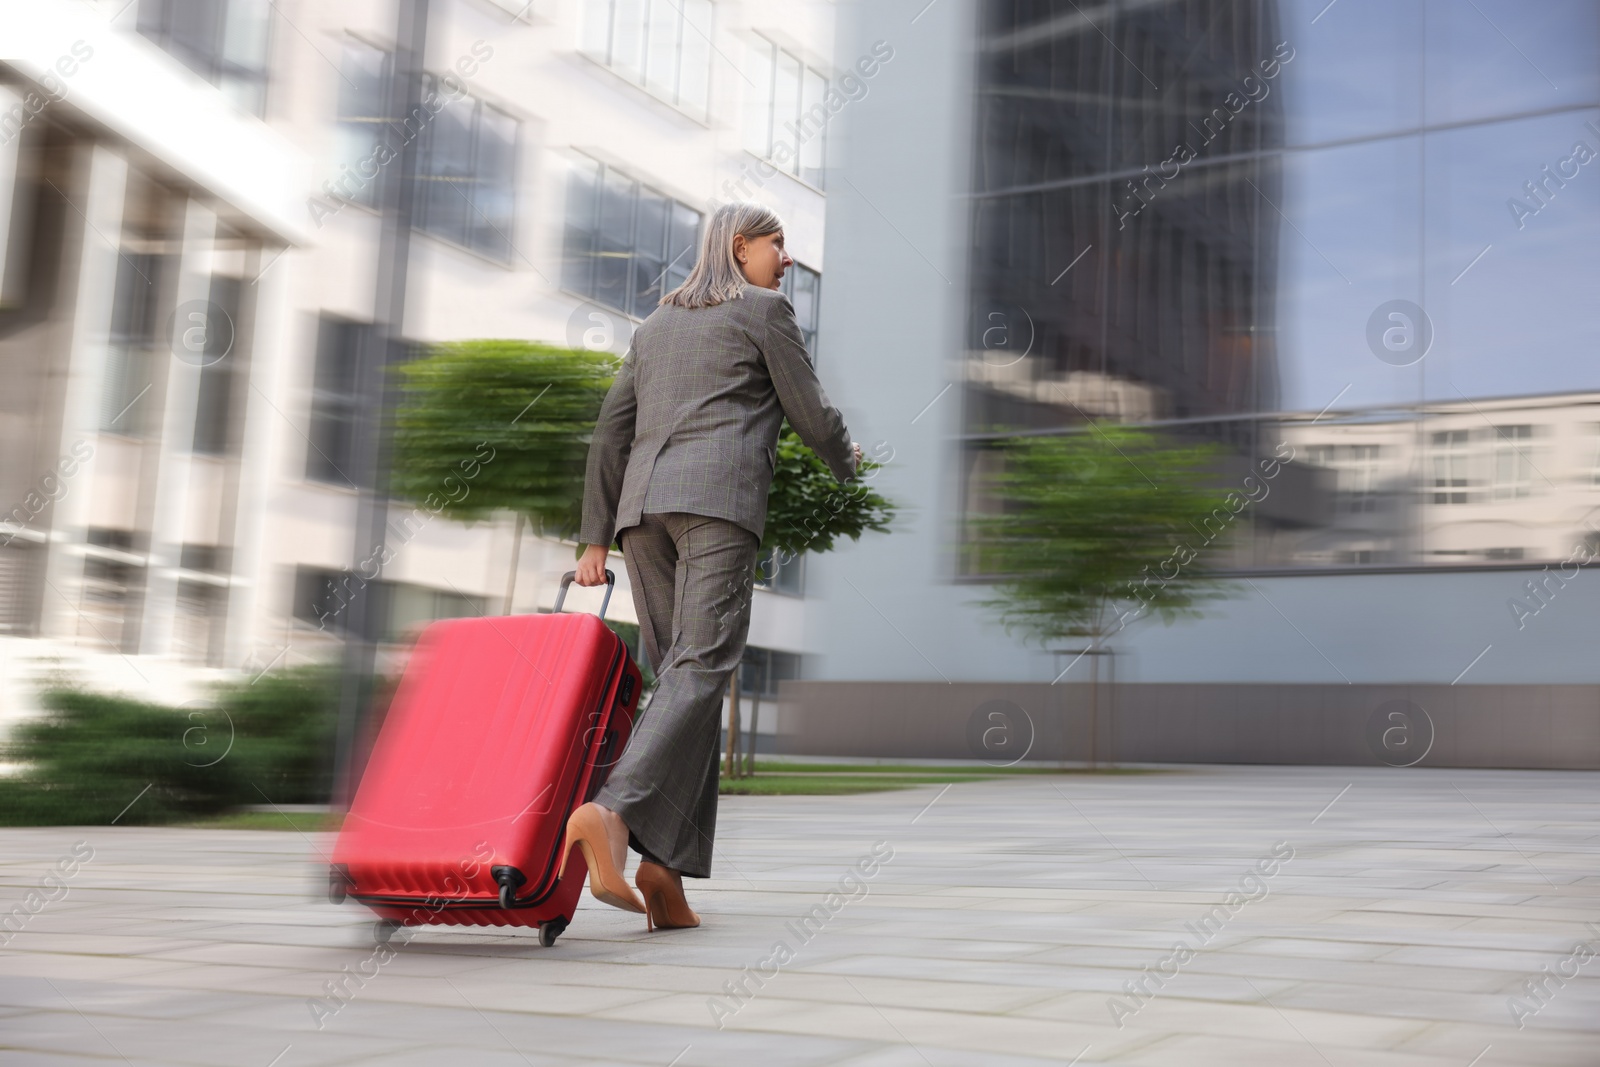 Image of Being late. Woman with suitcase running on city street. Motion blur effect